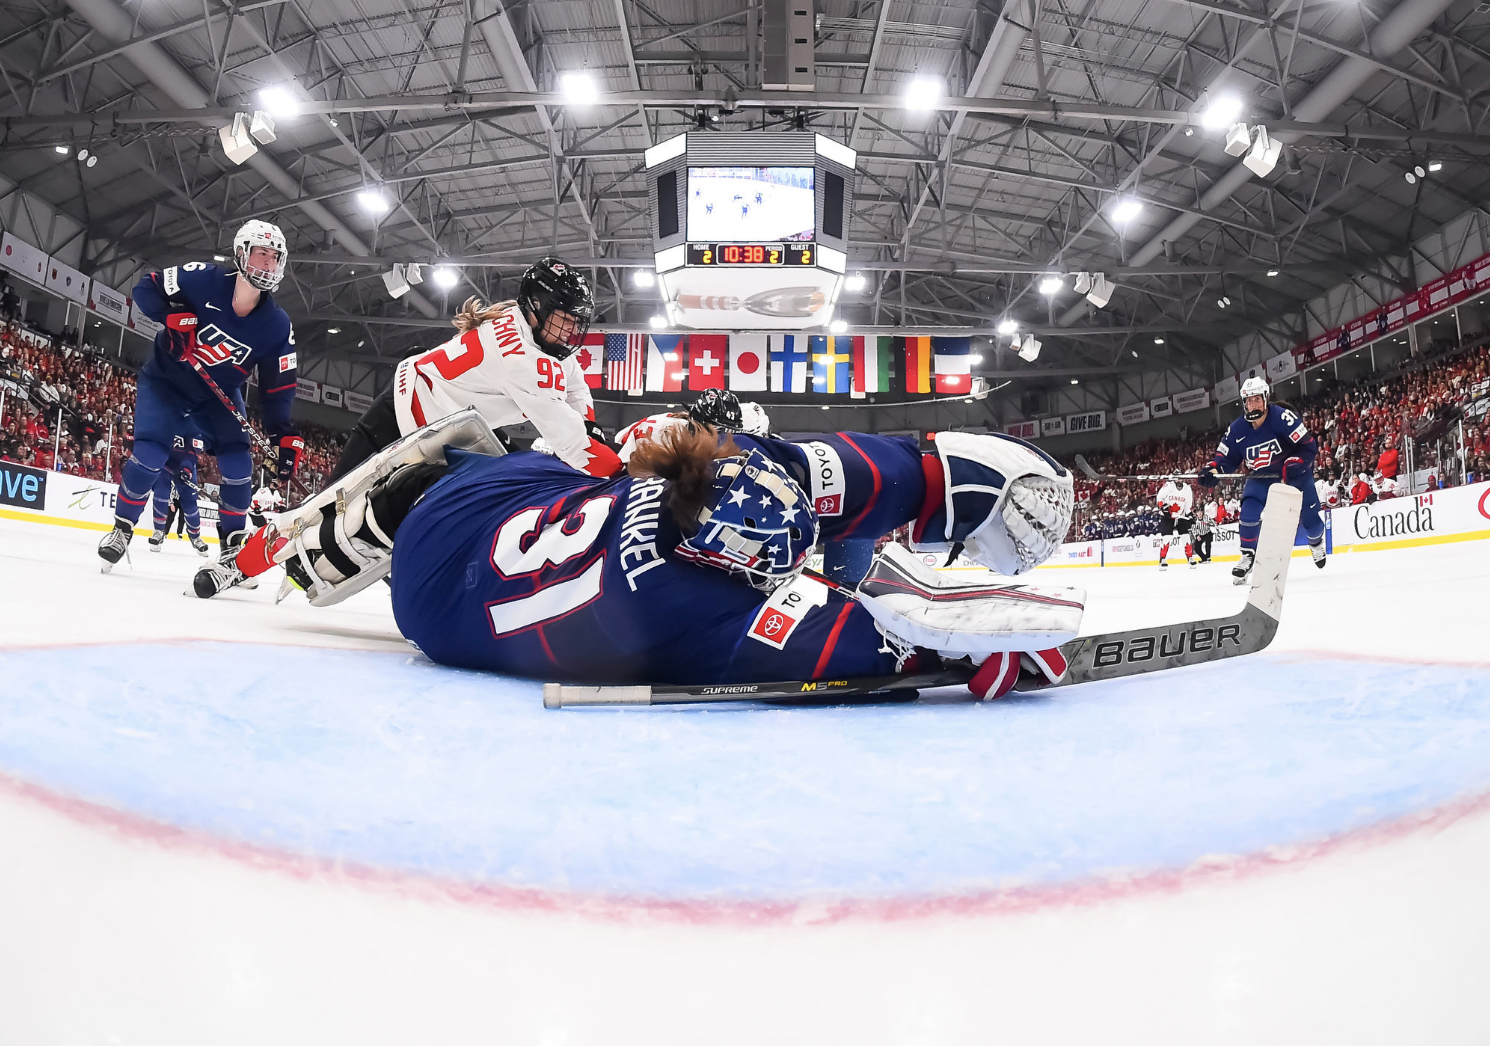 Frankel lays out to make a save against Canada. The shot is taken from inside the net, so it's of Frankel's back. She is wearing navy and laying with arms and legs outstretched, and the puck is just visible under her stick. Multiple skates from each side are in the background.